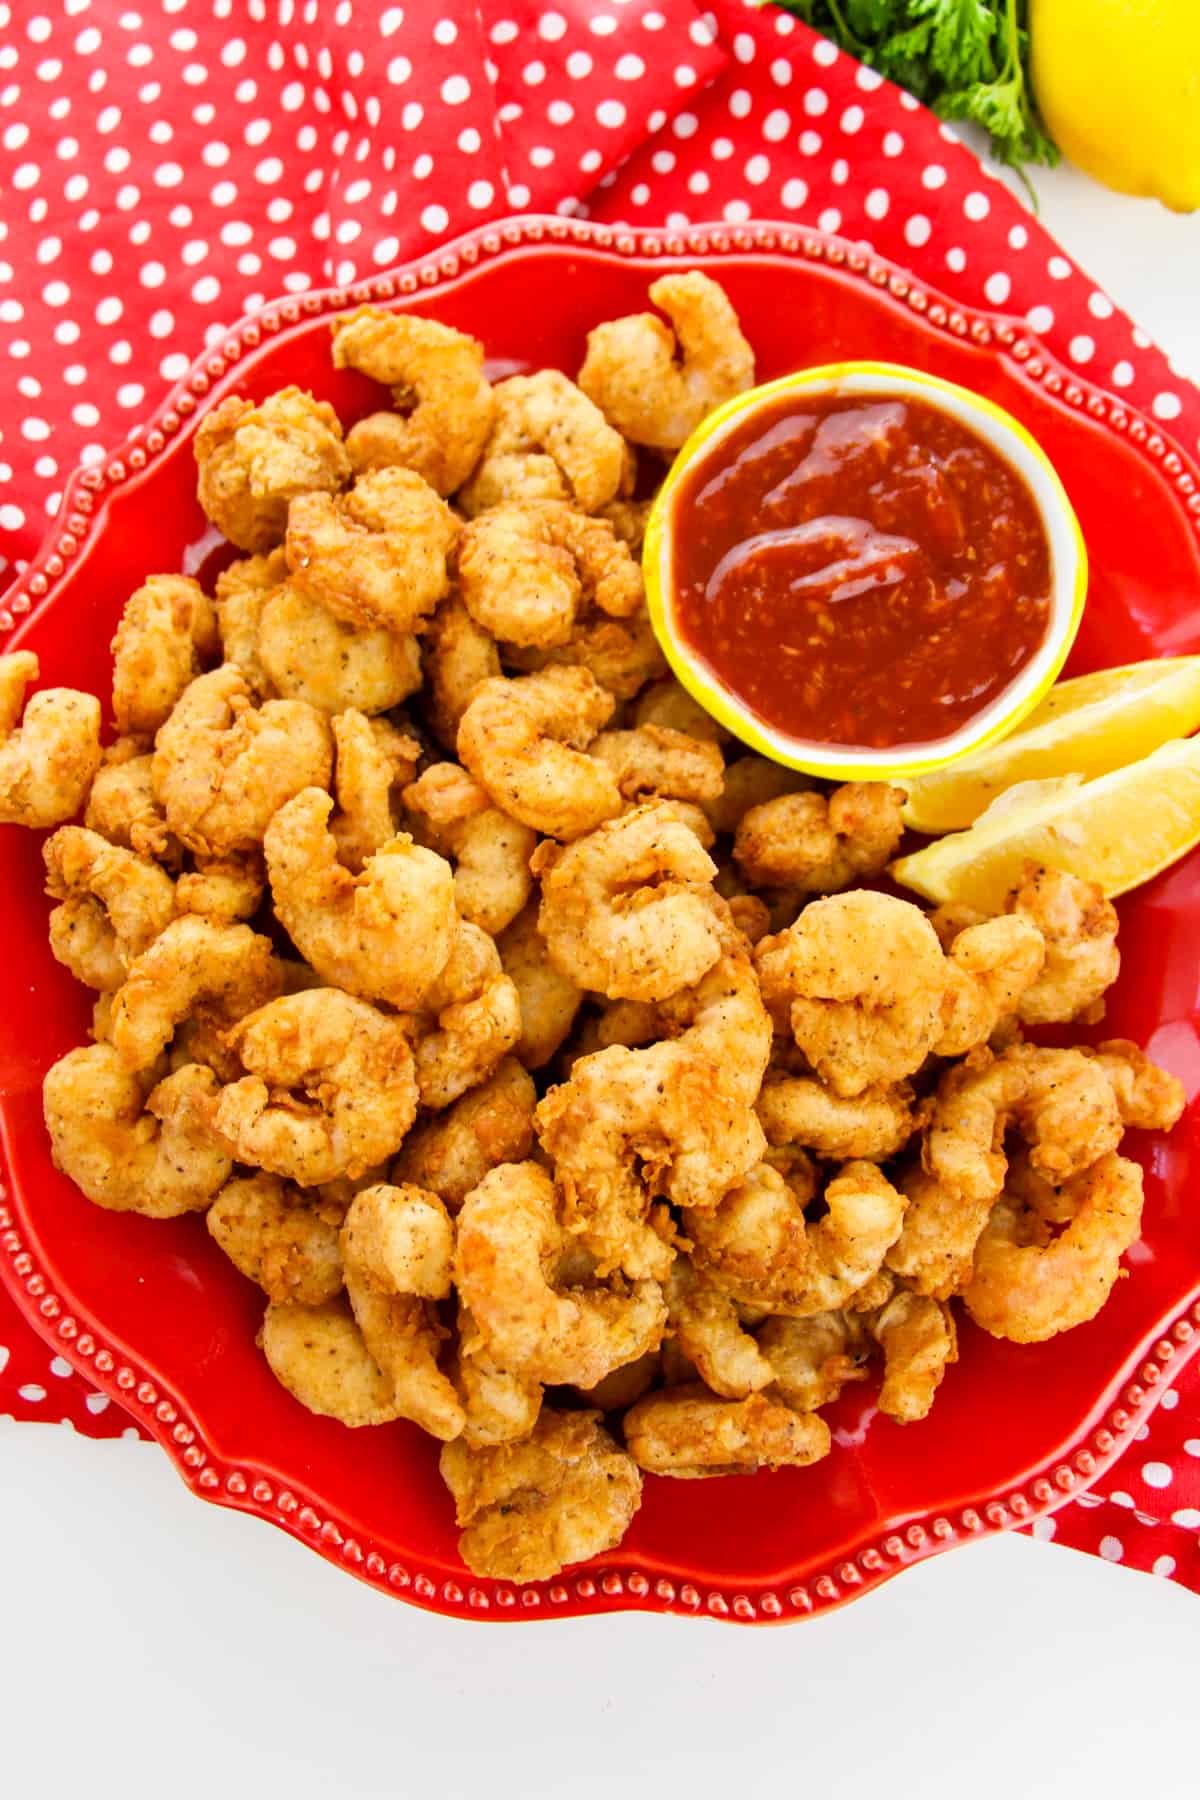 Popcorn shrimp with cocktail sauce and lemon wedges on red plate